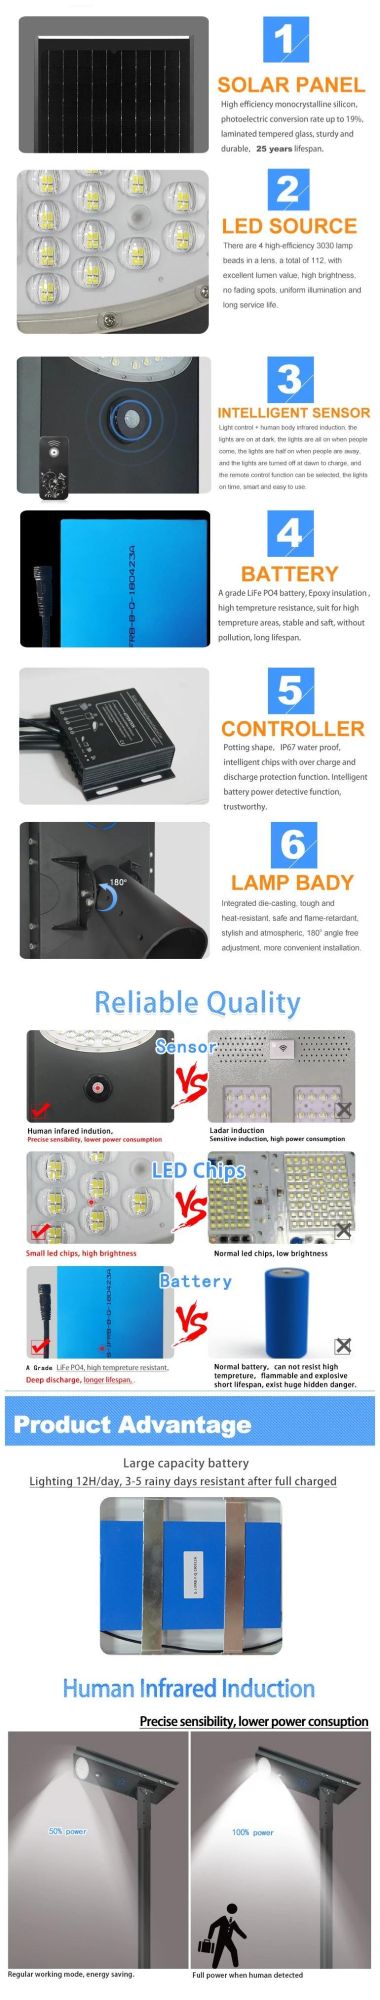 Pleasant Premium Quality All-in-One Integrated Outdoor Garden LED Solar Street Light with Smart Motion Sensor